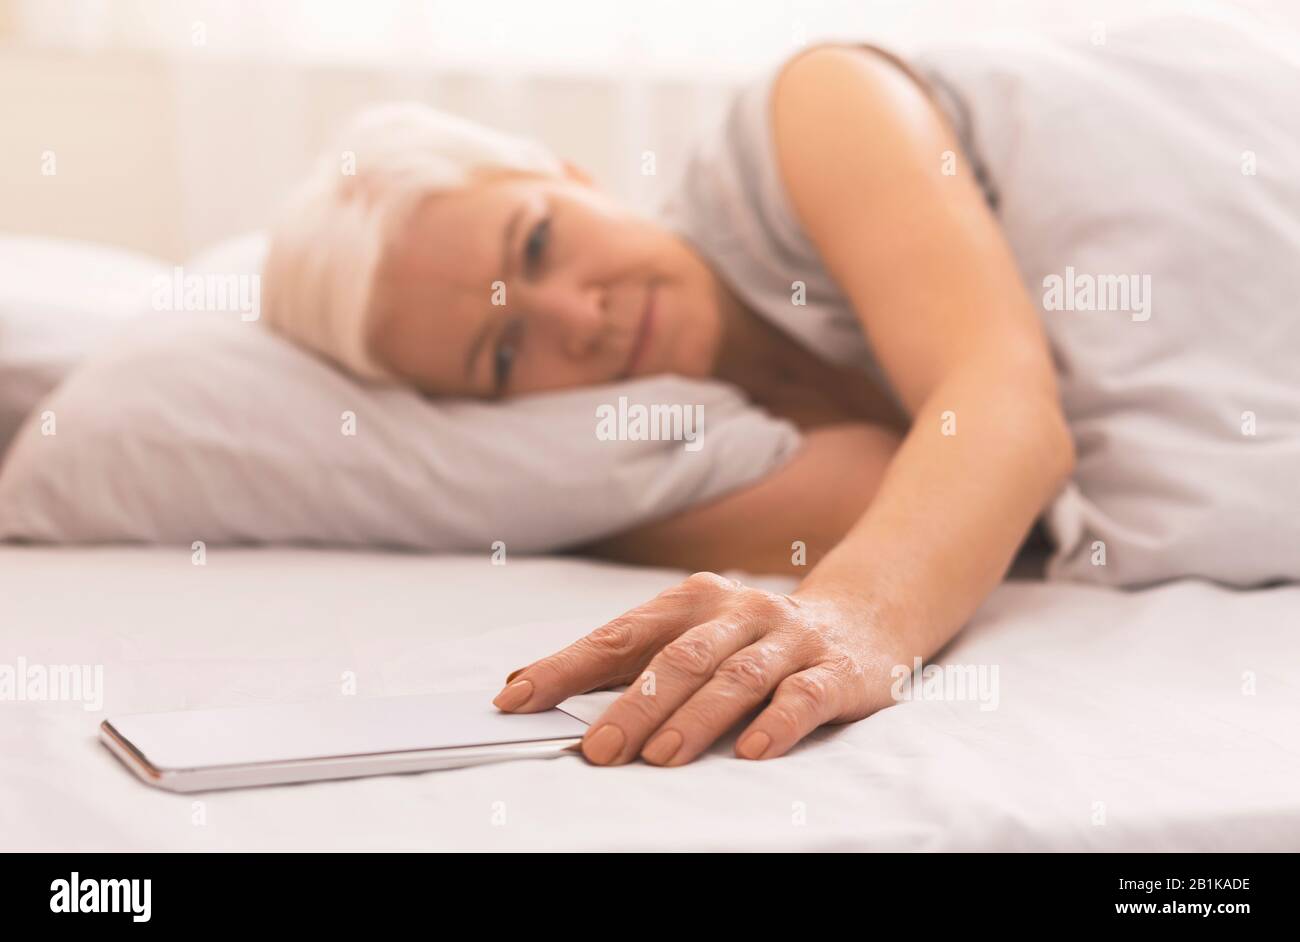 Tired senior woman in bed checking time on her phone Stock Photo